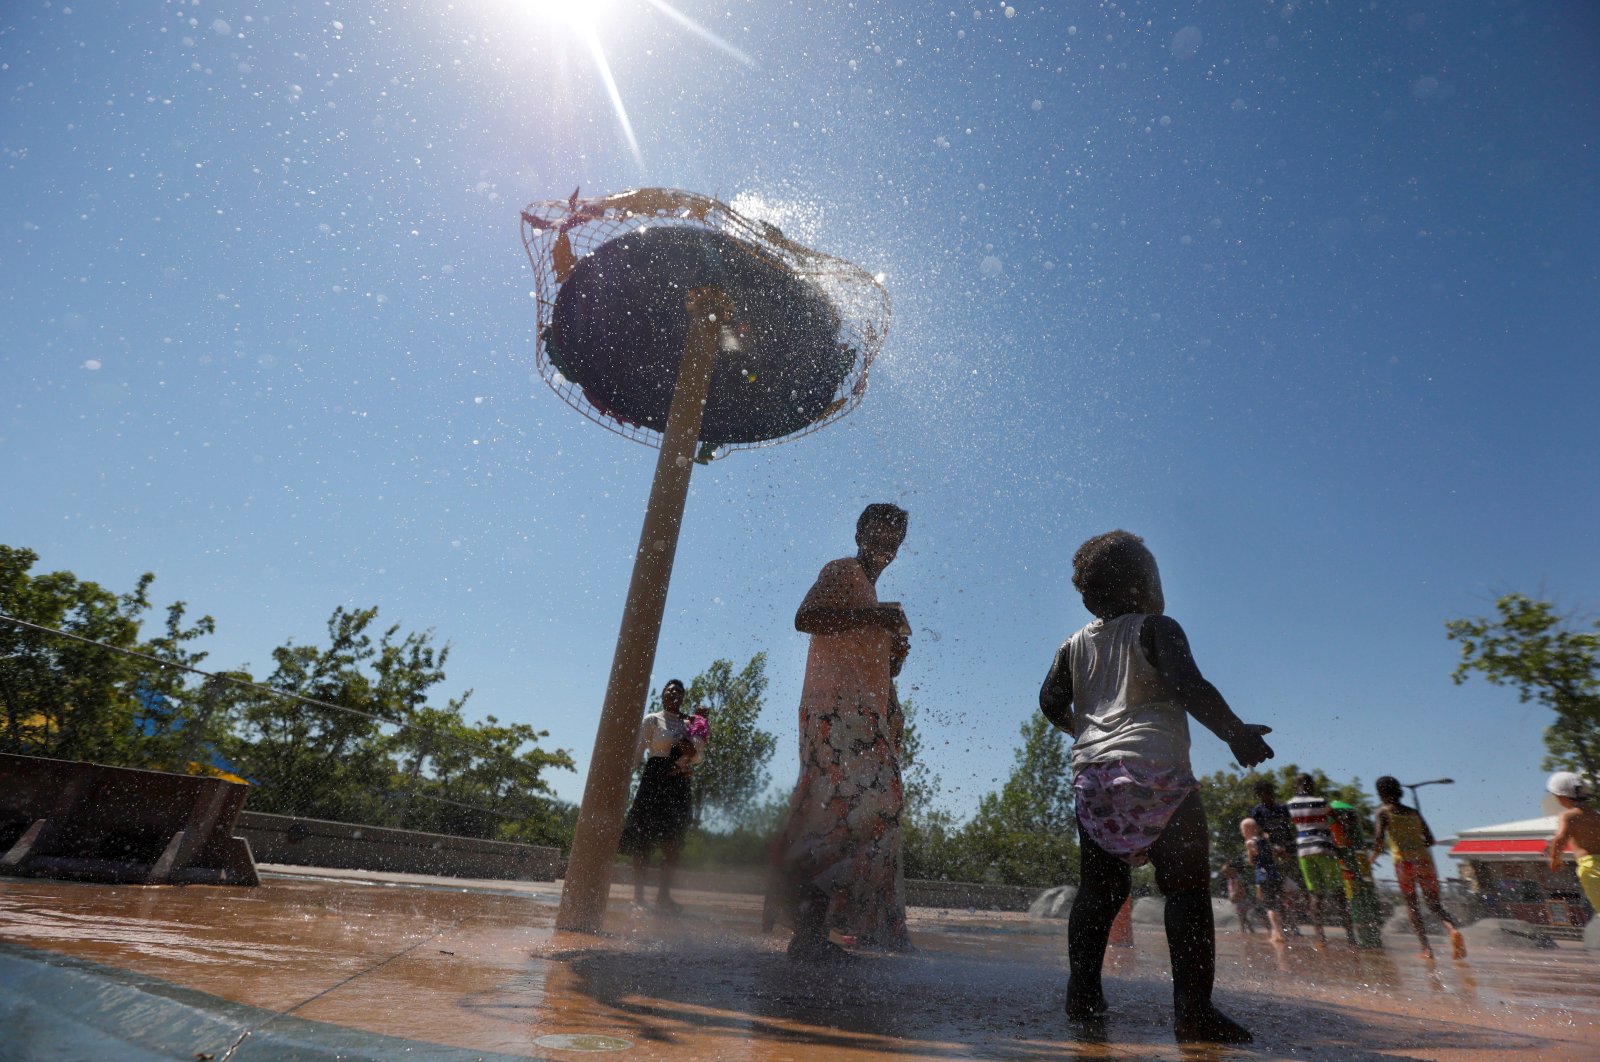 Kids play in water to cool off during the scorching weather of a heat wave at a River Landing splash park in Saskatoon, Saskatchewan, Canada, July 2, 2021. (Reuters Photo)